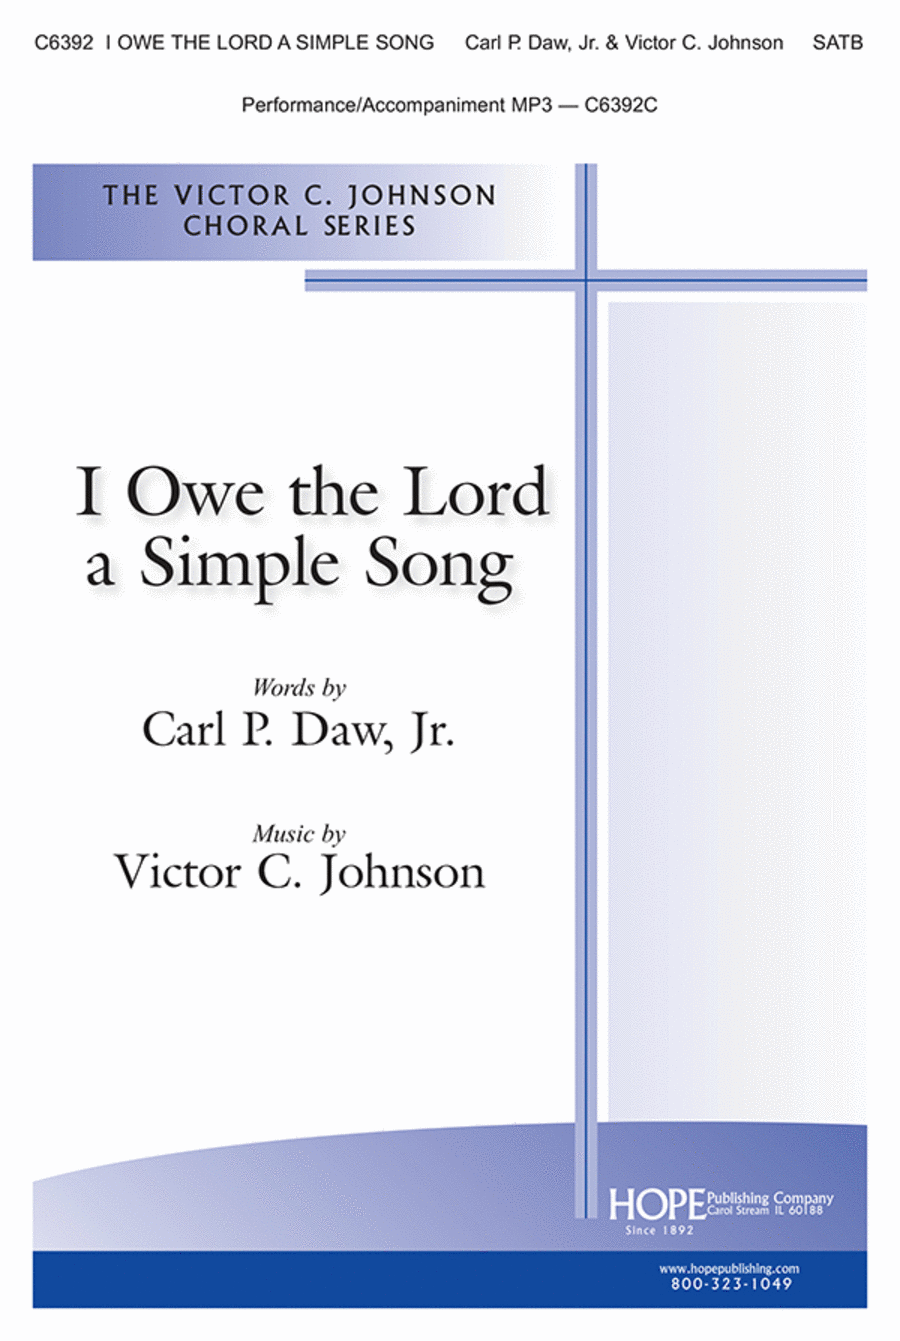 I Owe the Lord a Simple Song